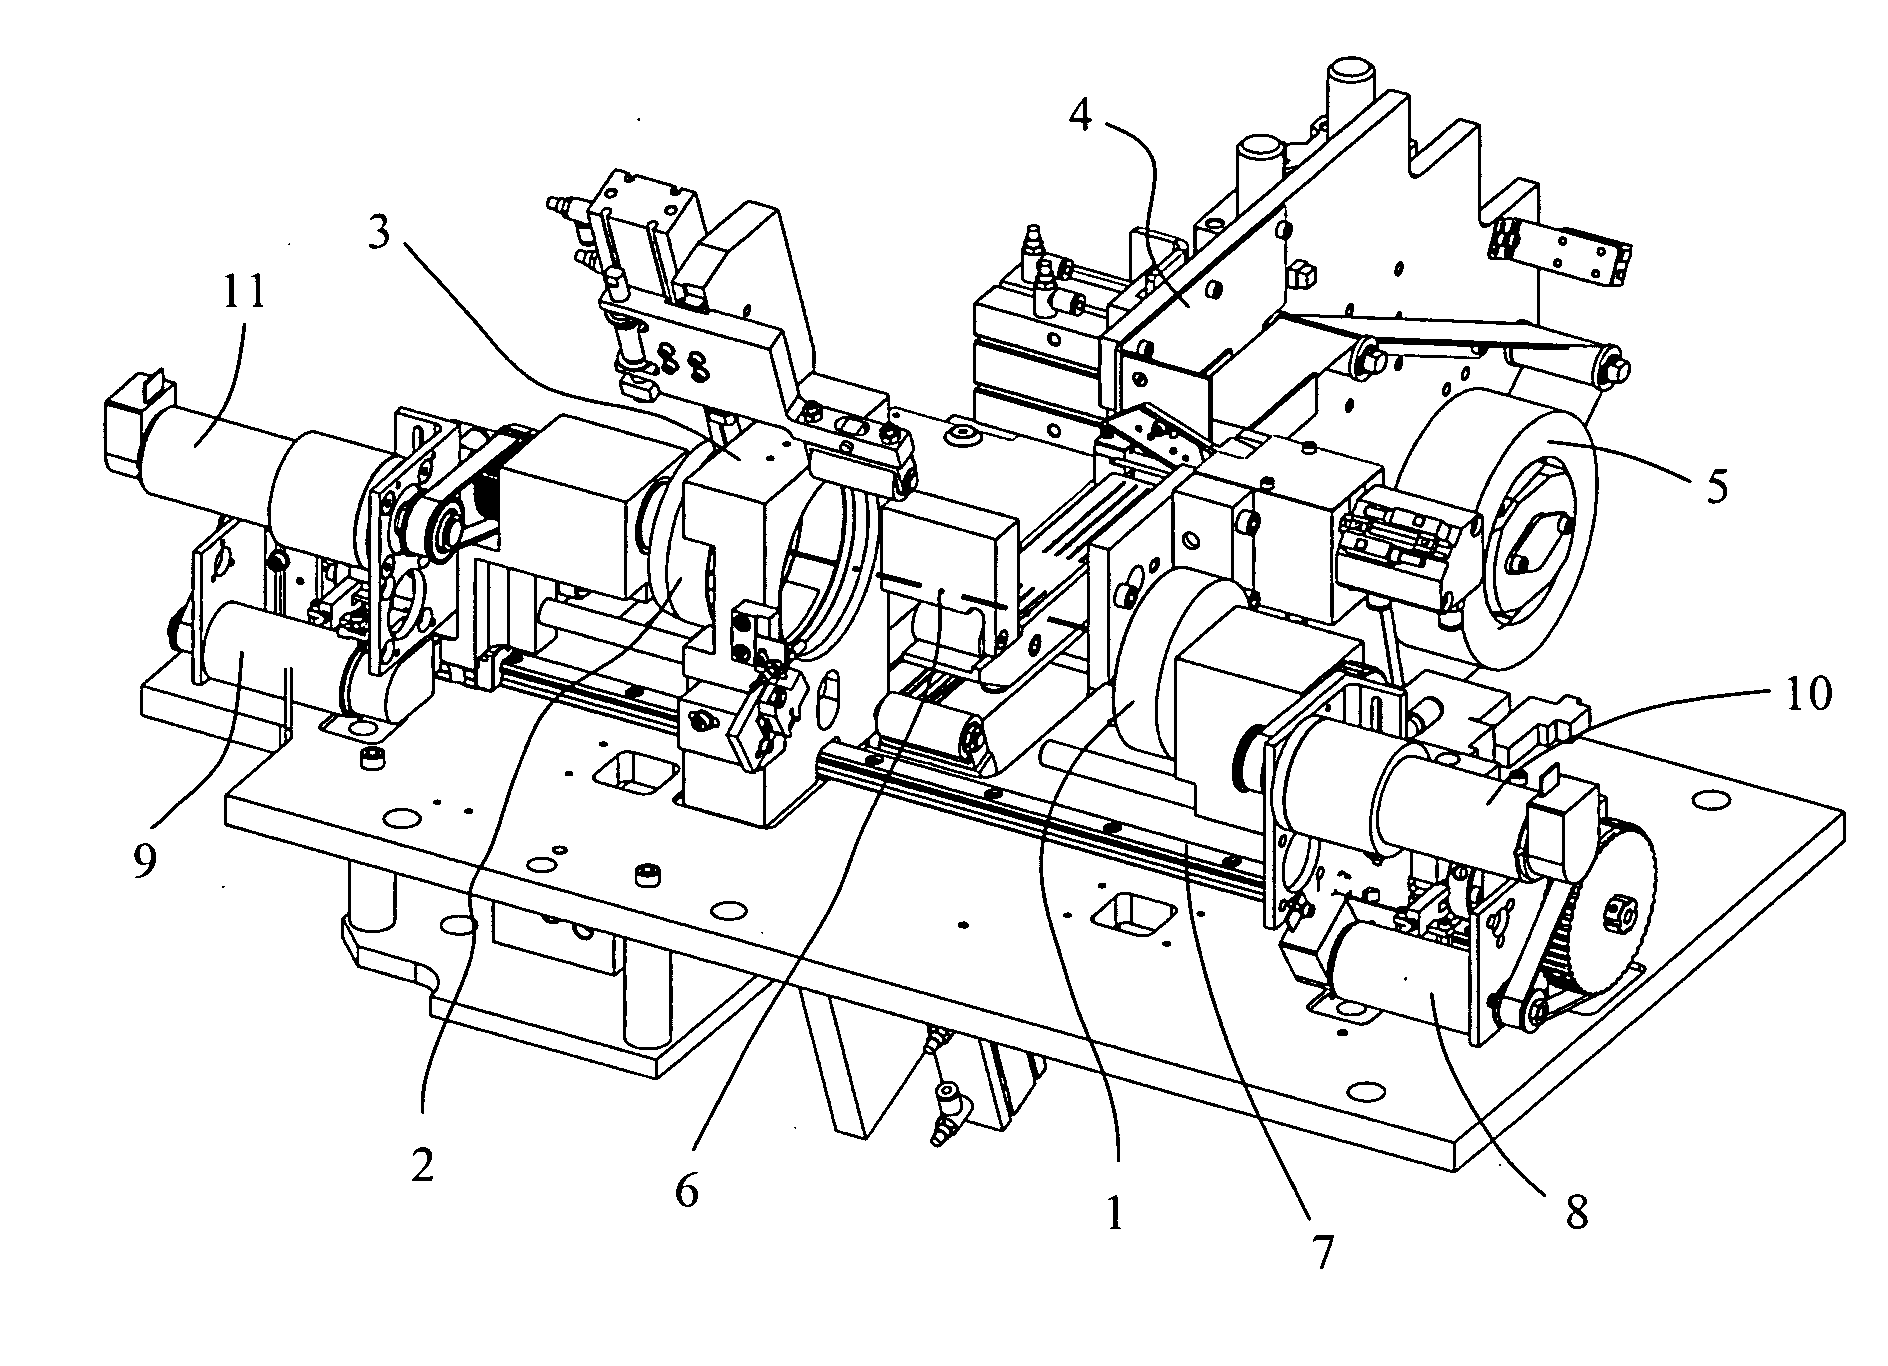 Device for aligning two shell molds